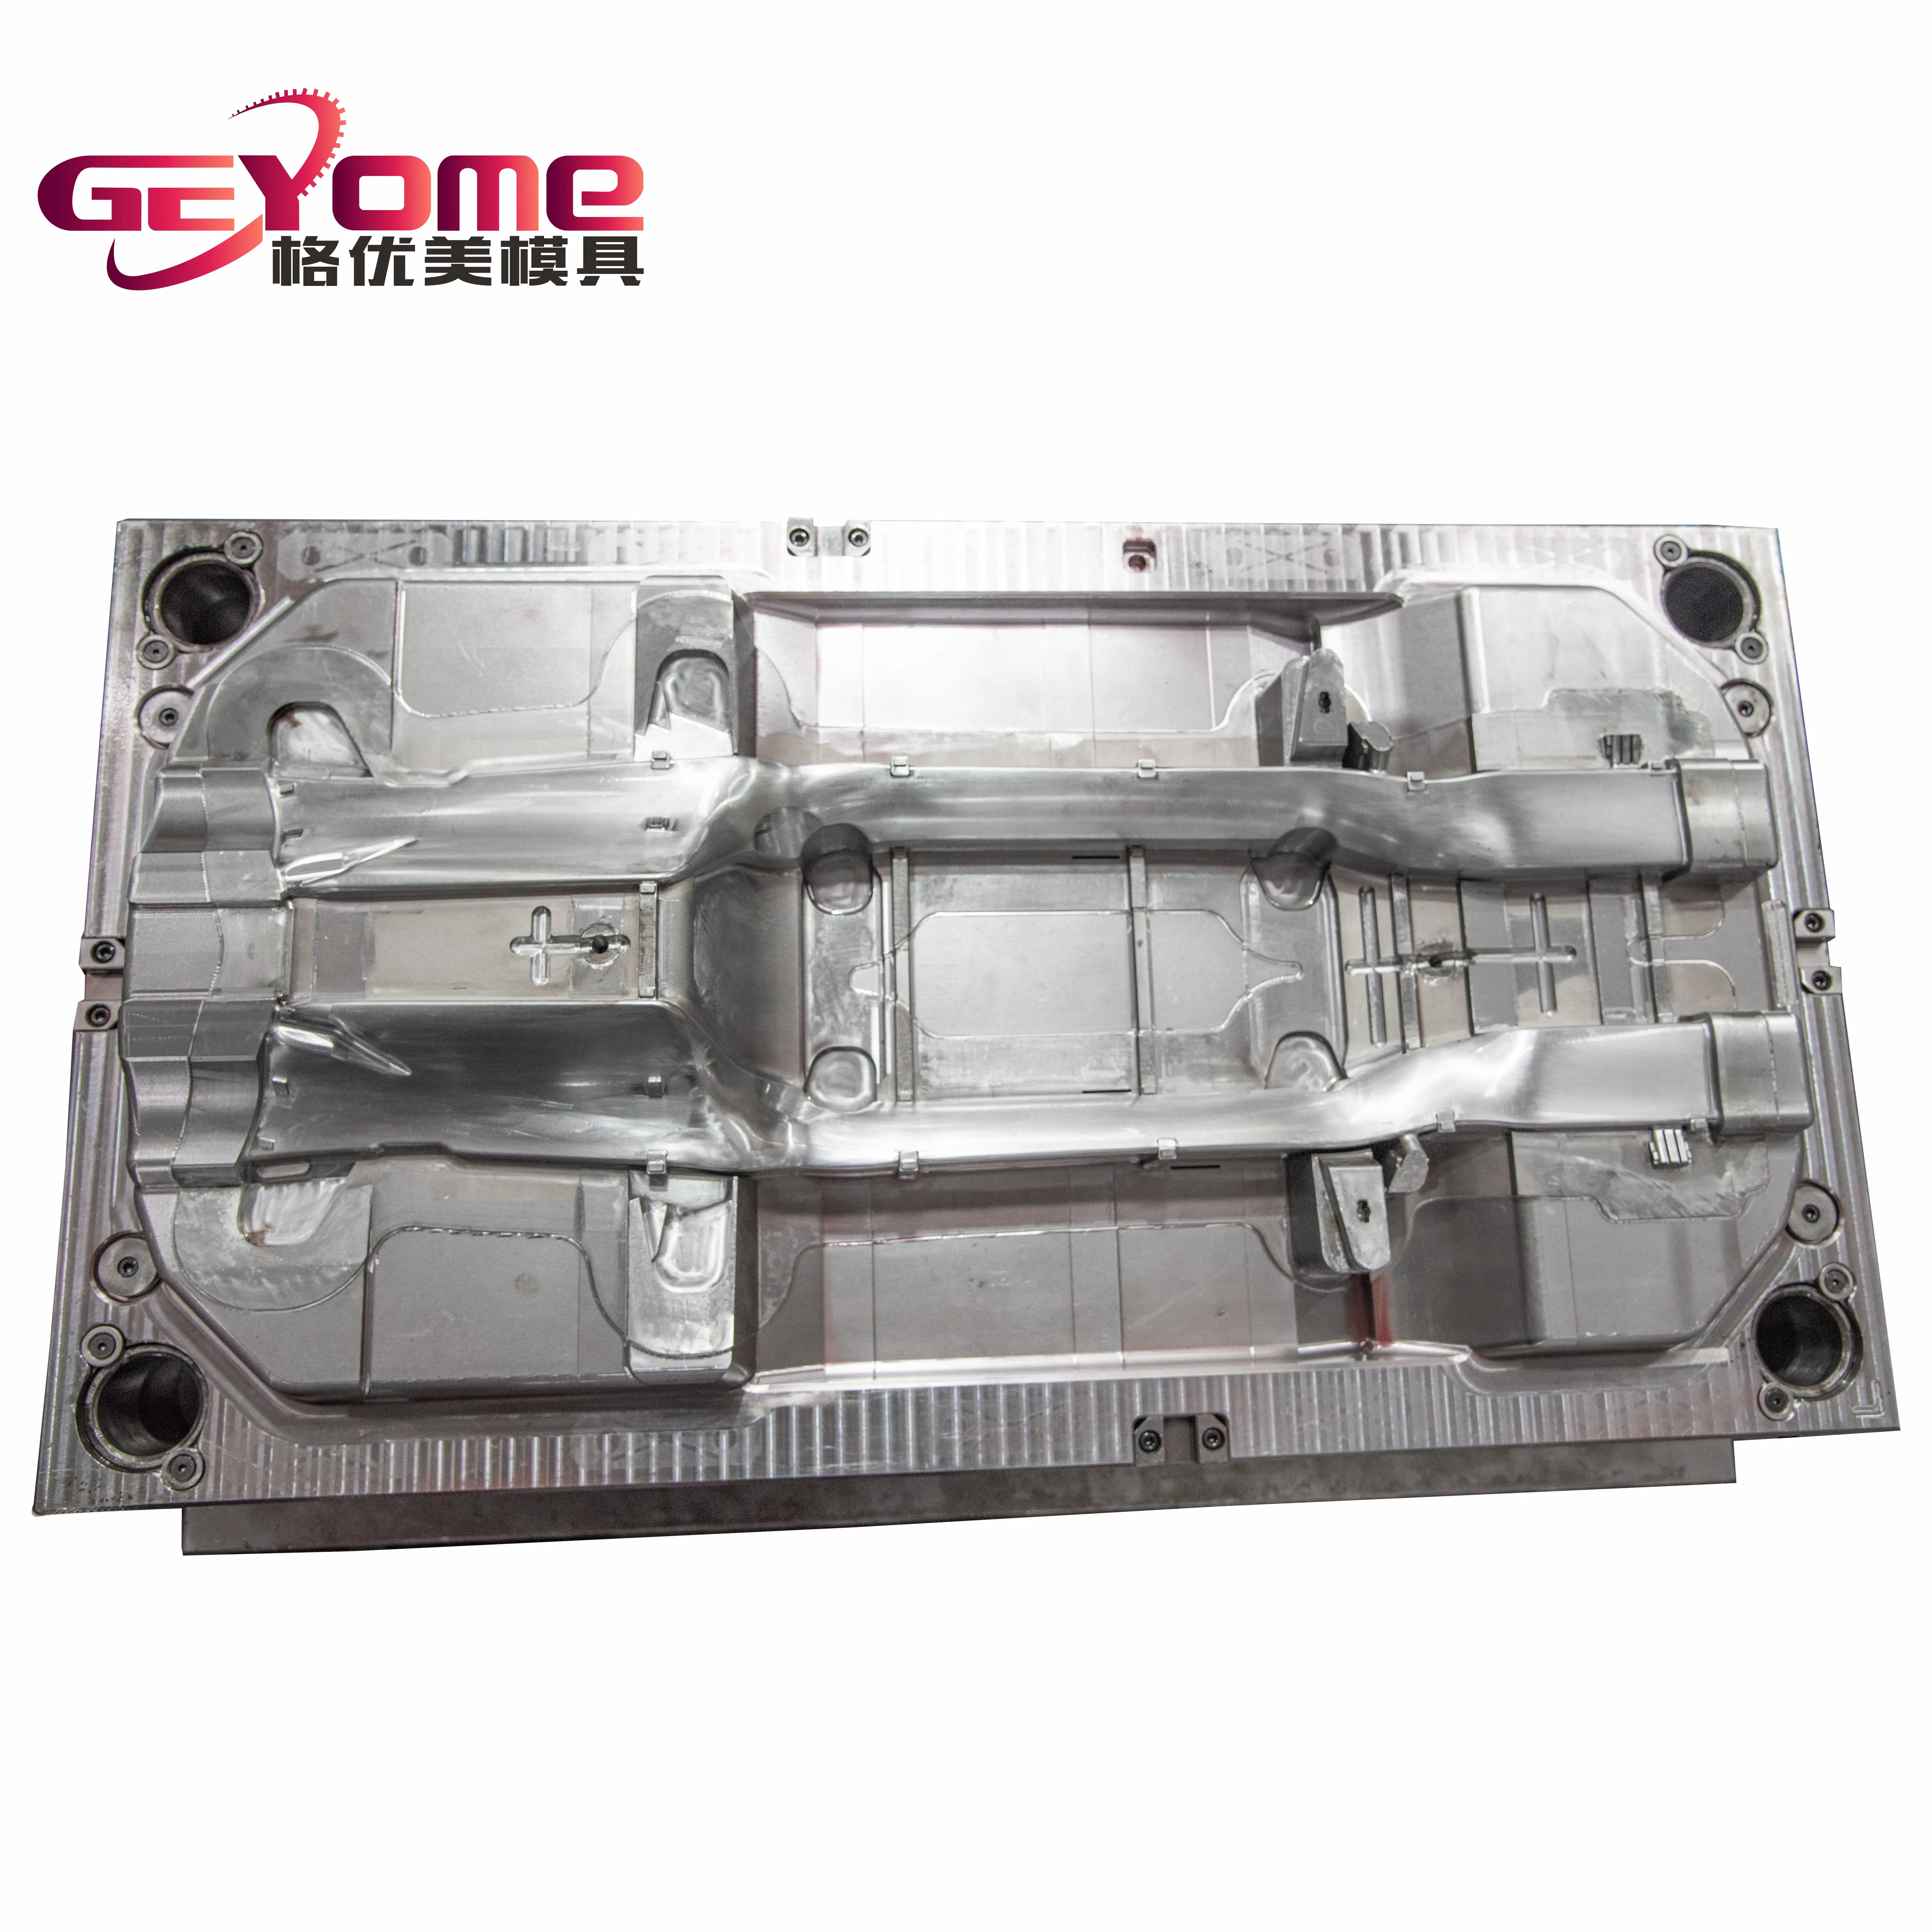 custom auto parts mold for plastic injection mold car part molding manufactures